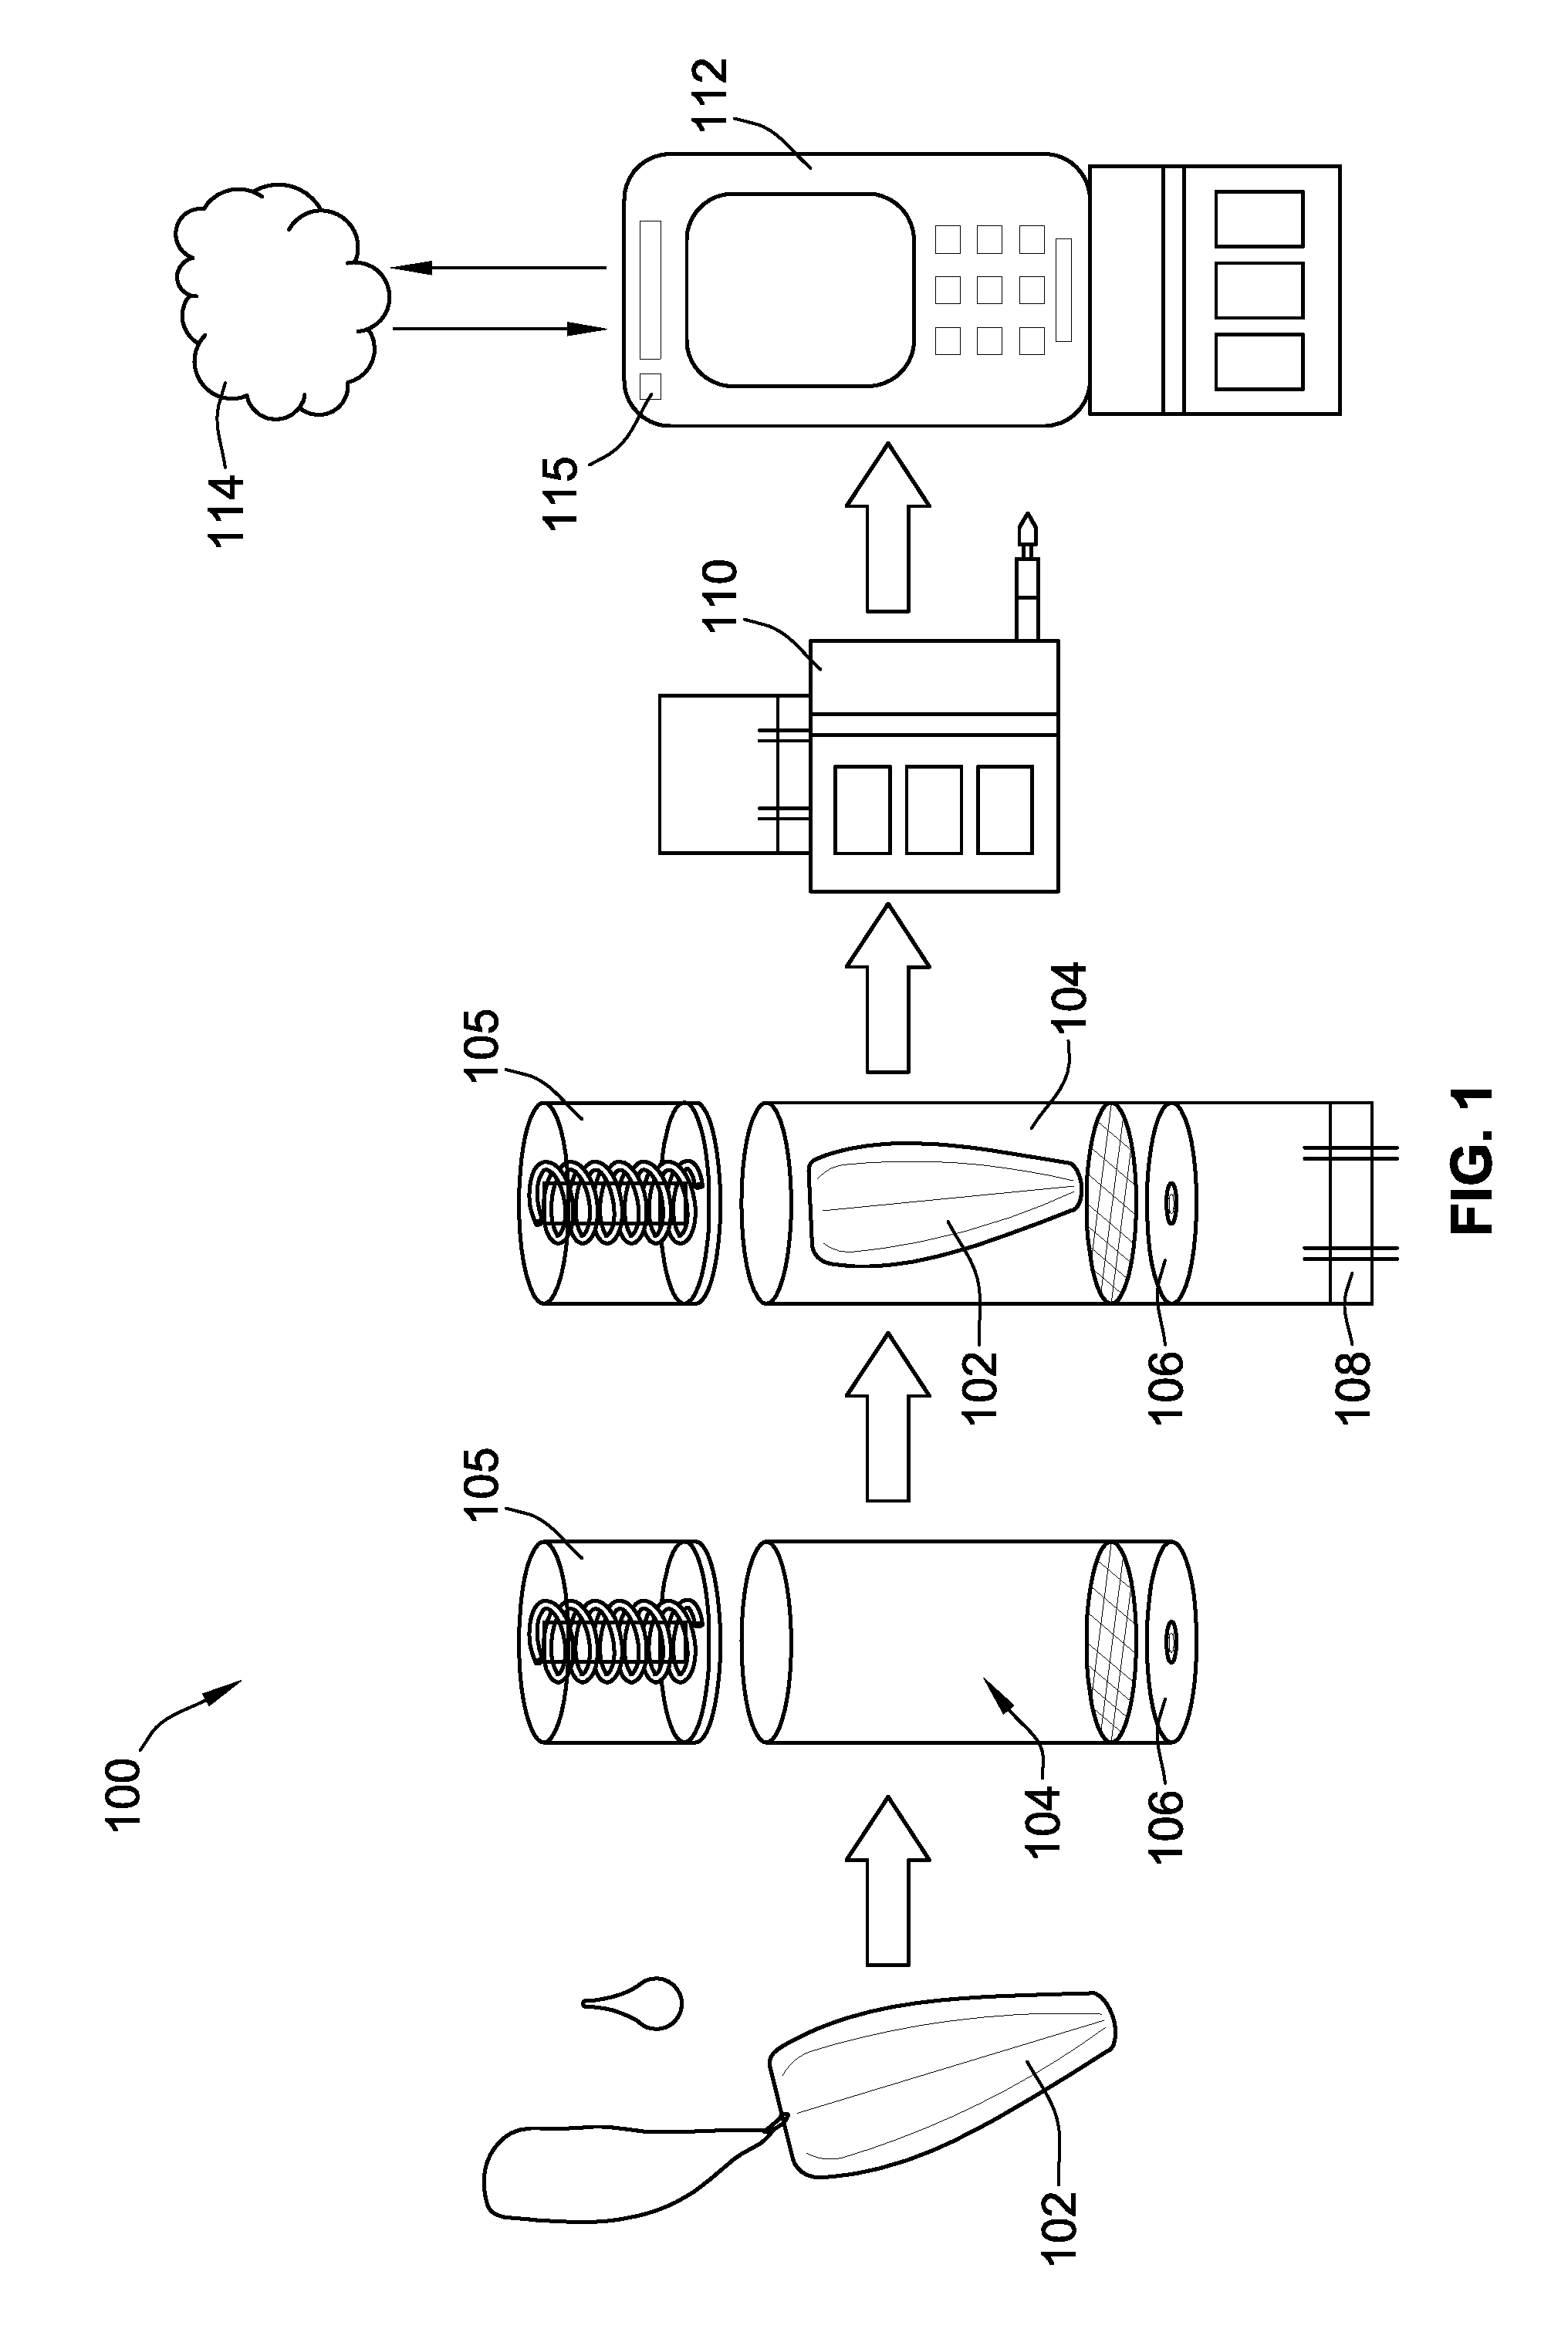 System and method for monitoring health based on collected bodily fluid